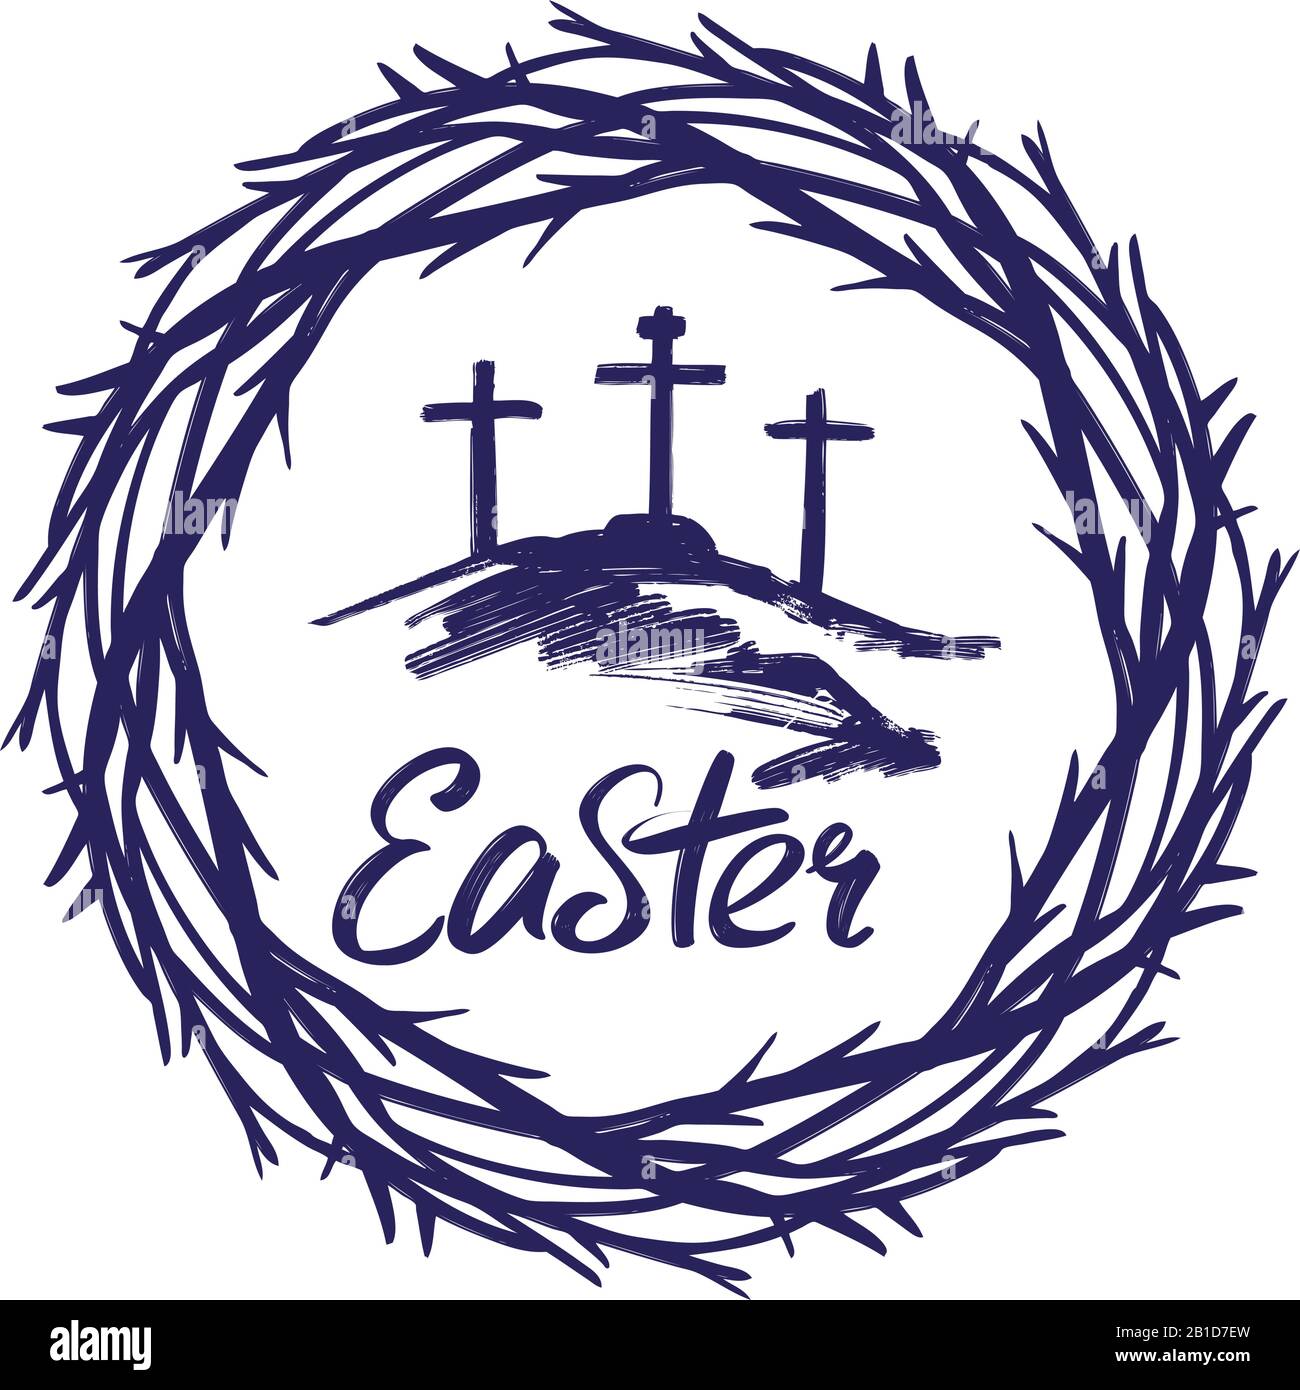 crown of thorns and calligraphic text logo, easter religious ...